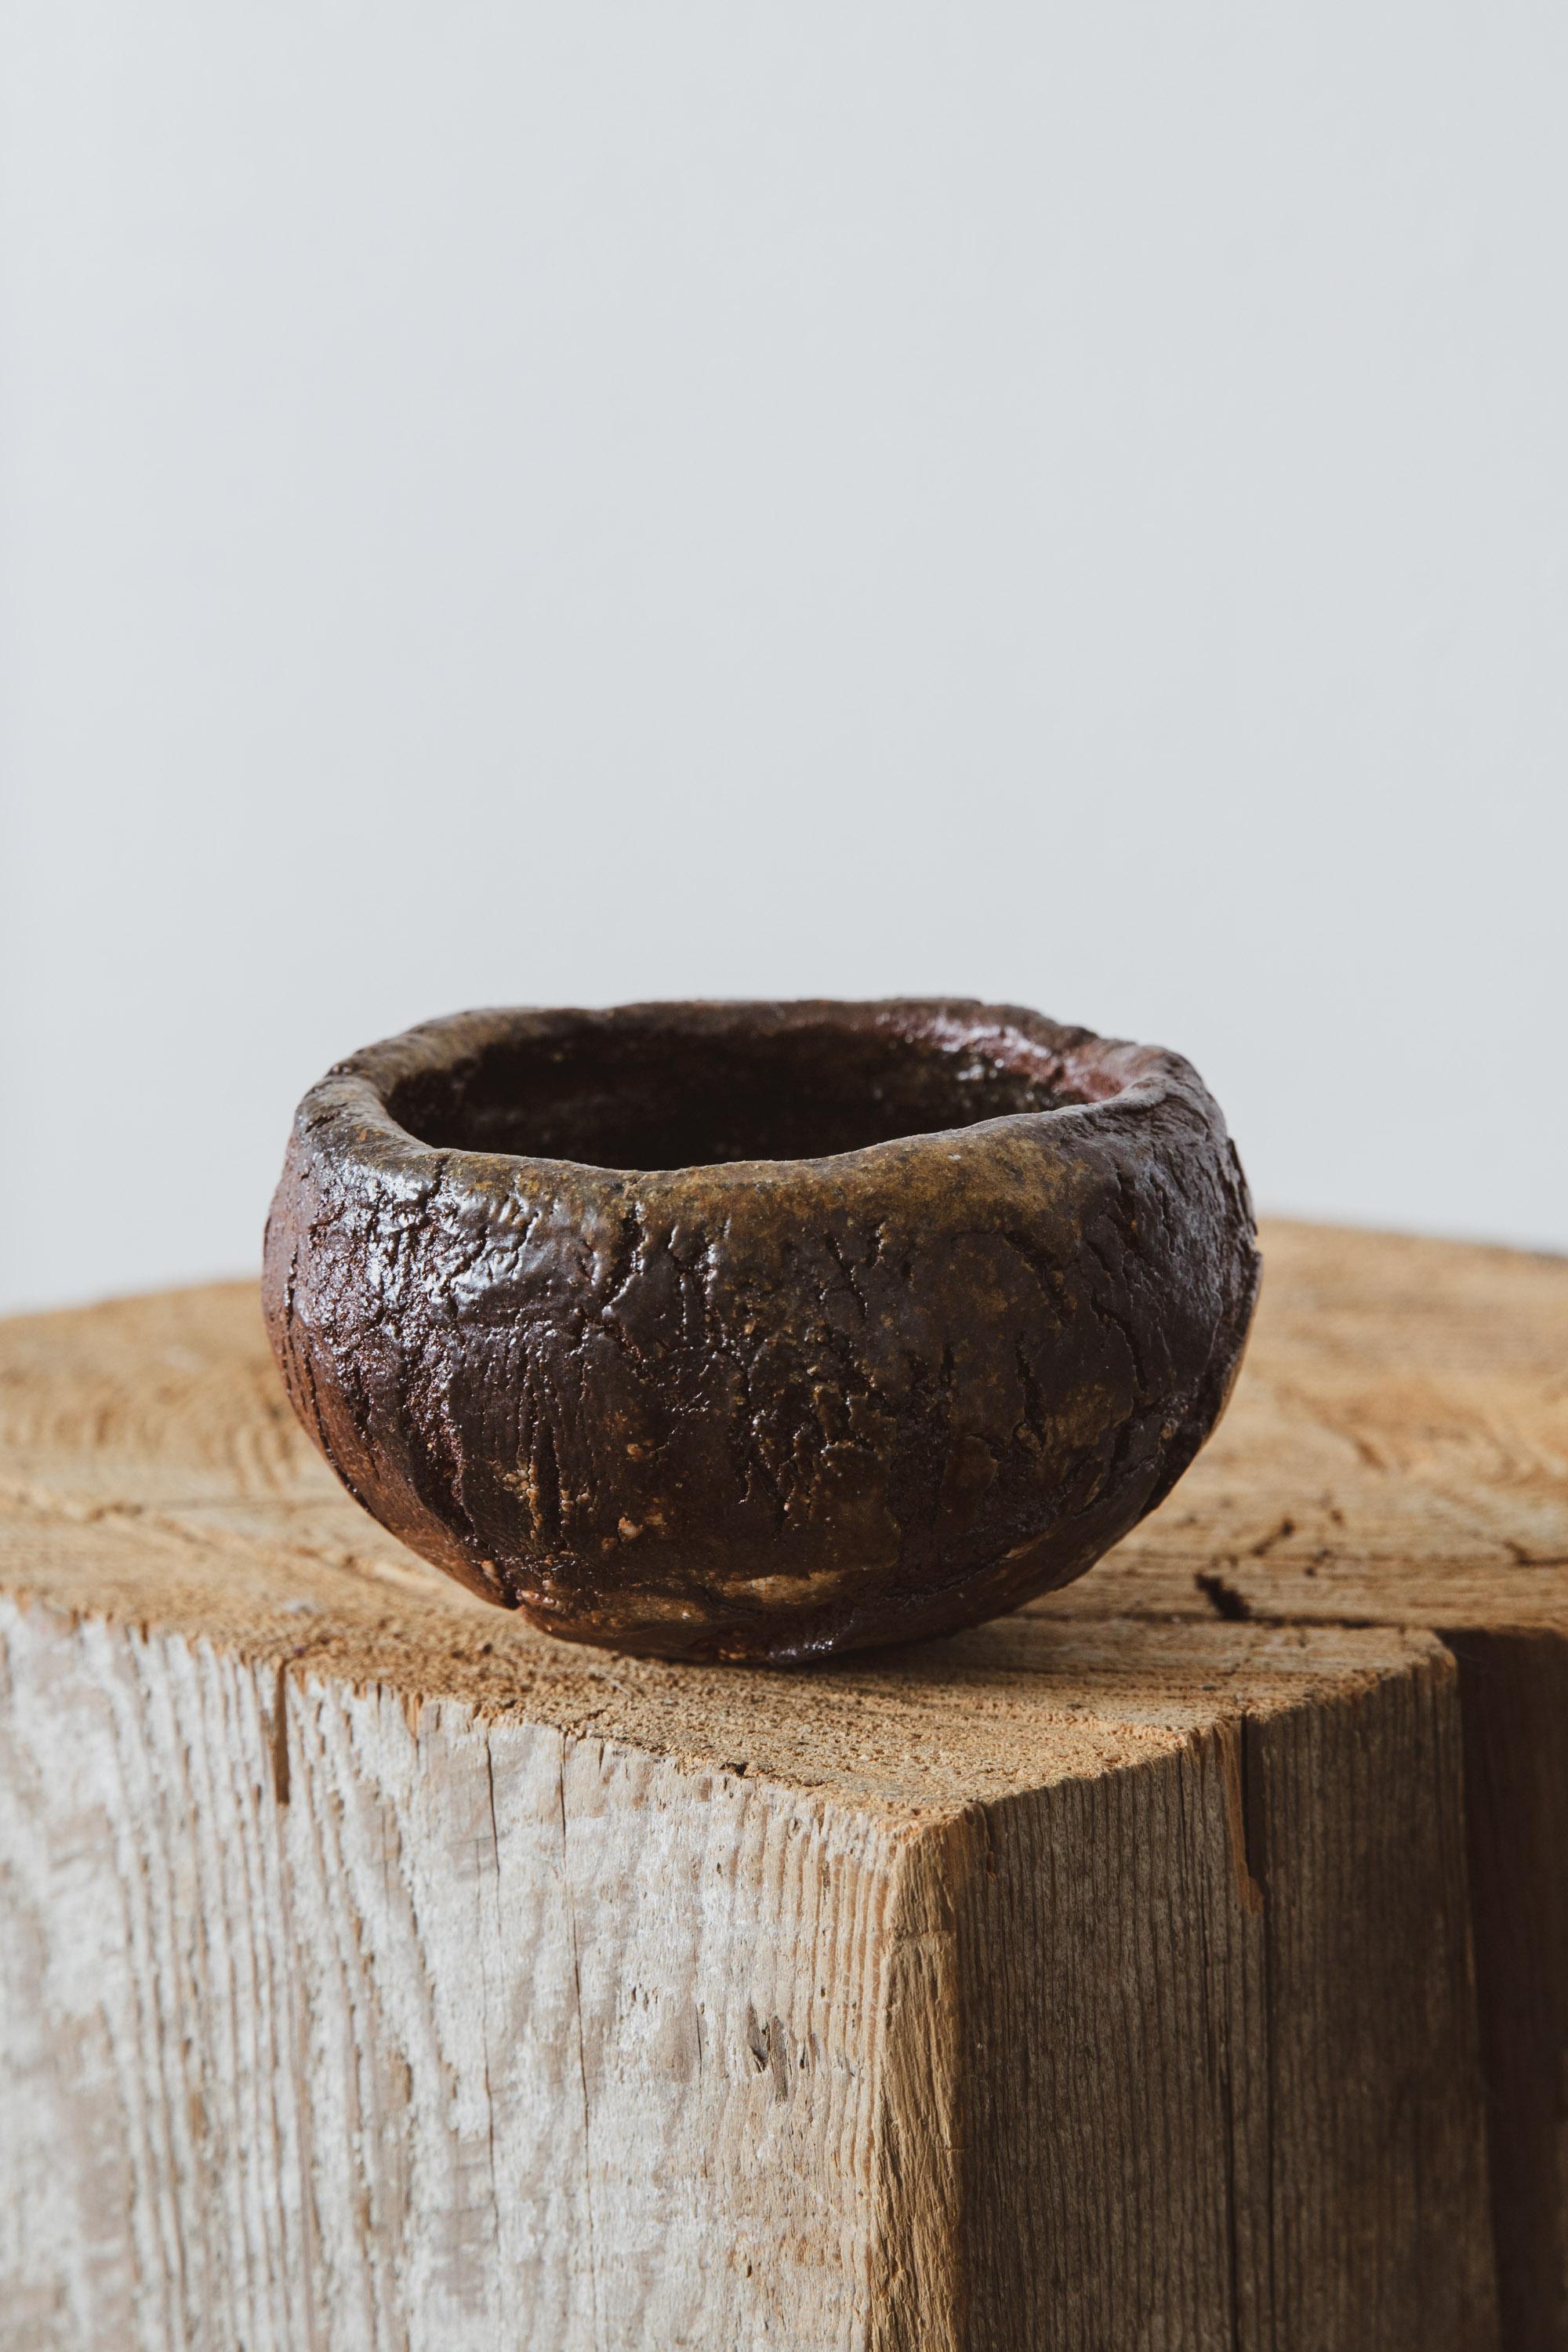 Introducing the Wood Fired Votive 4 with its delicate cracked surface texture and variegated color, a testament to the mesmerizing artistry of wood firing. This unique ceramic votive embodies the perfect marriage of nature and craftsmanship,